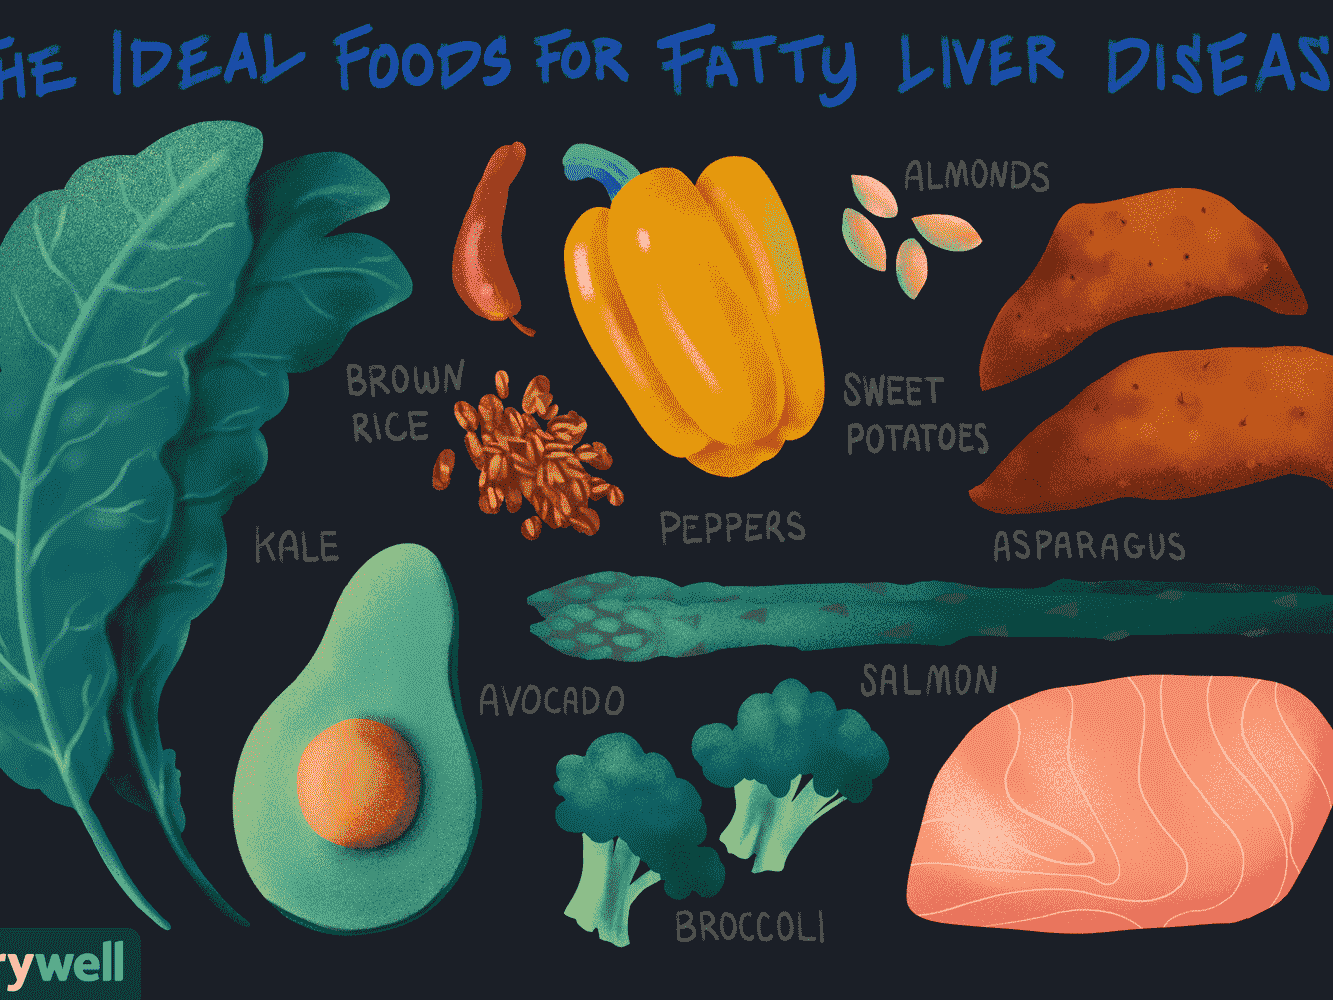 Foods that help fatty liver disease.